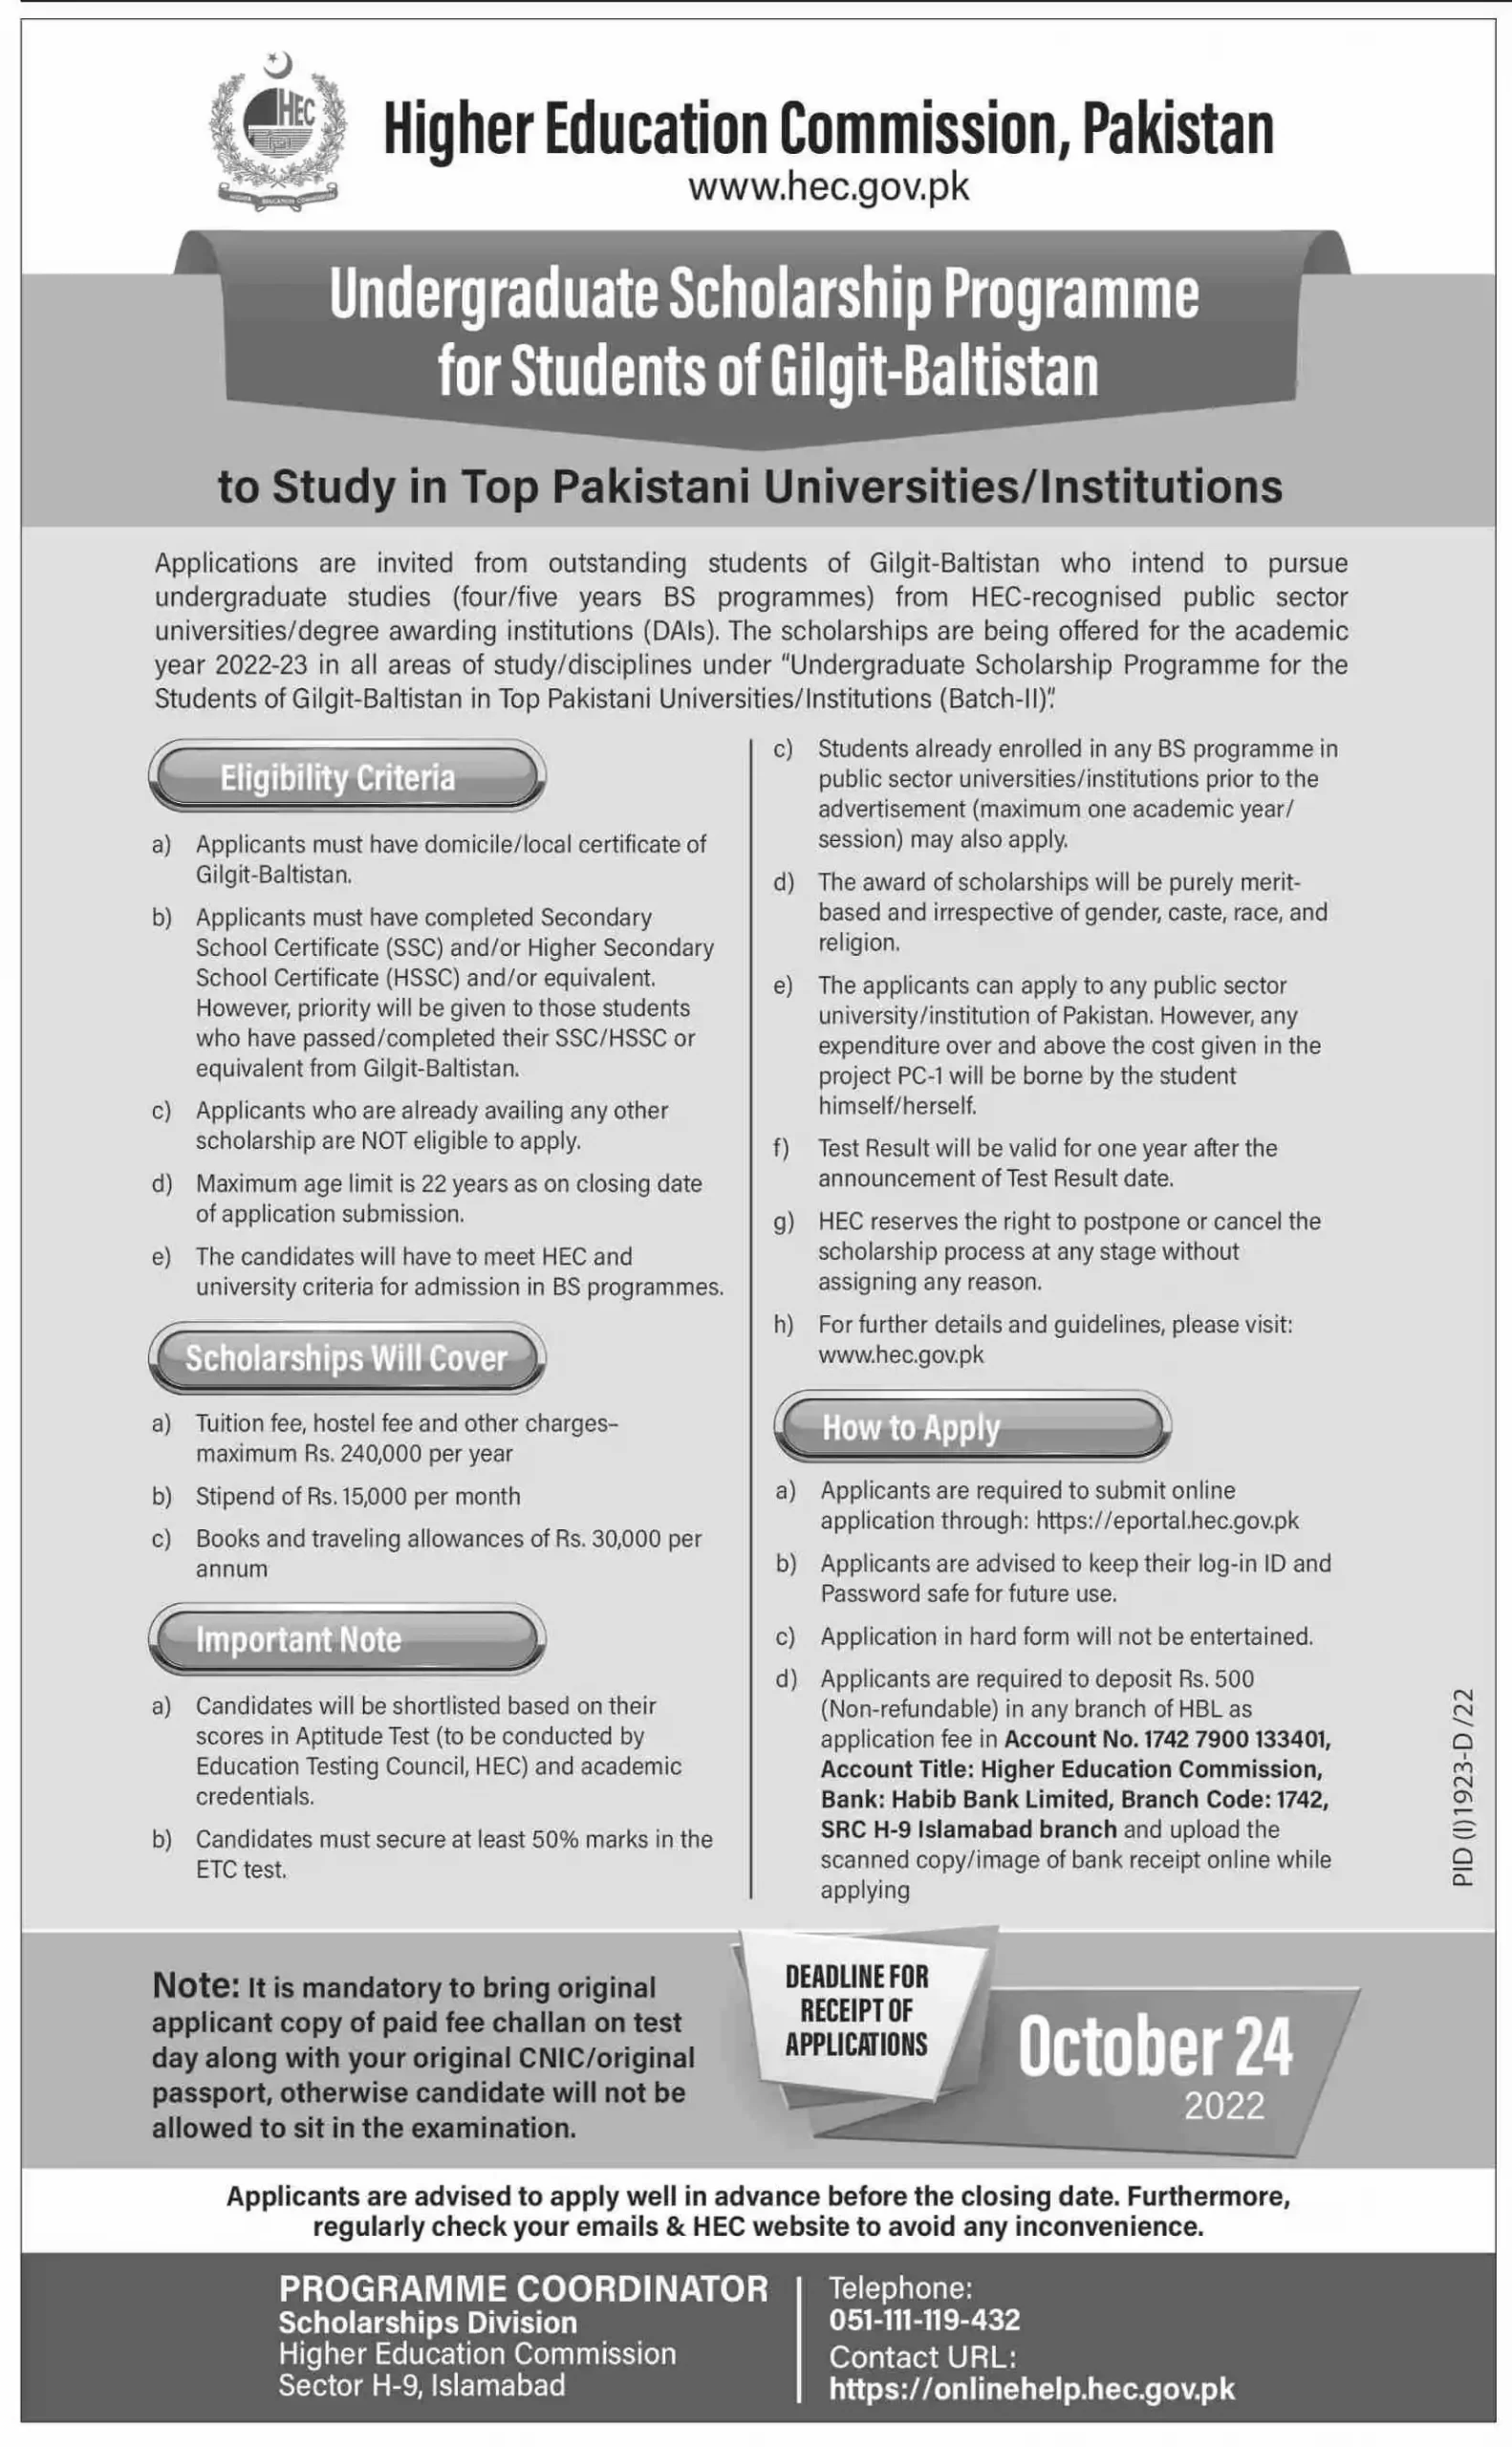 Undergraduate Scholarships for the Students of Gilgit-Baltistan 2022